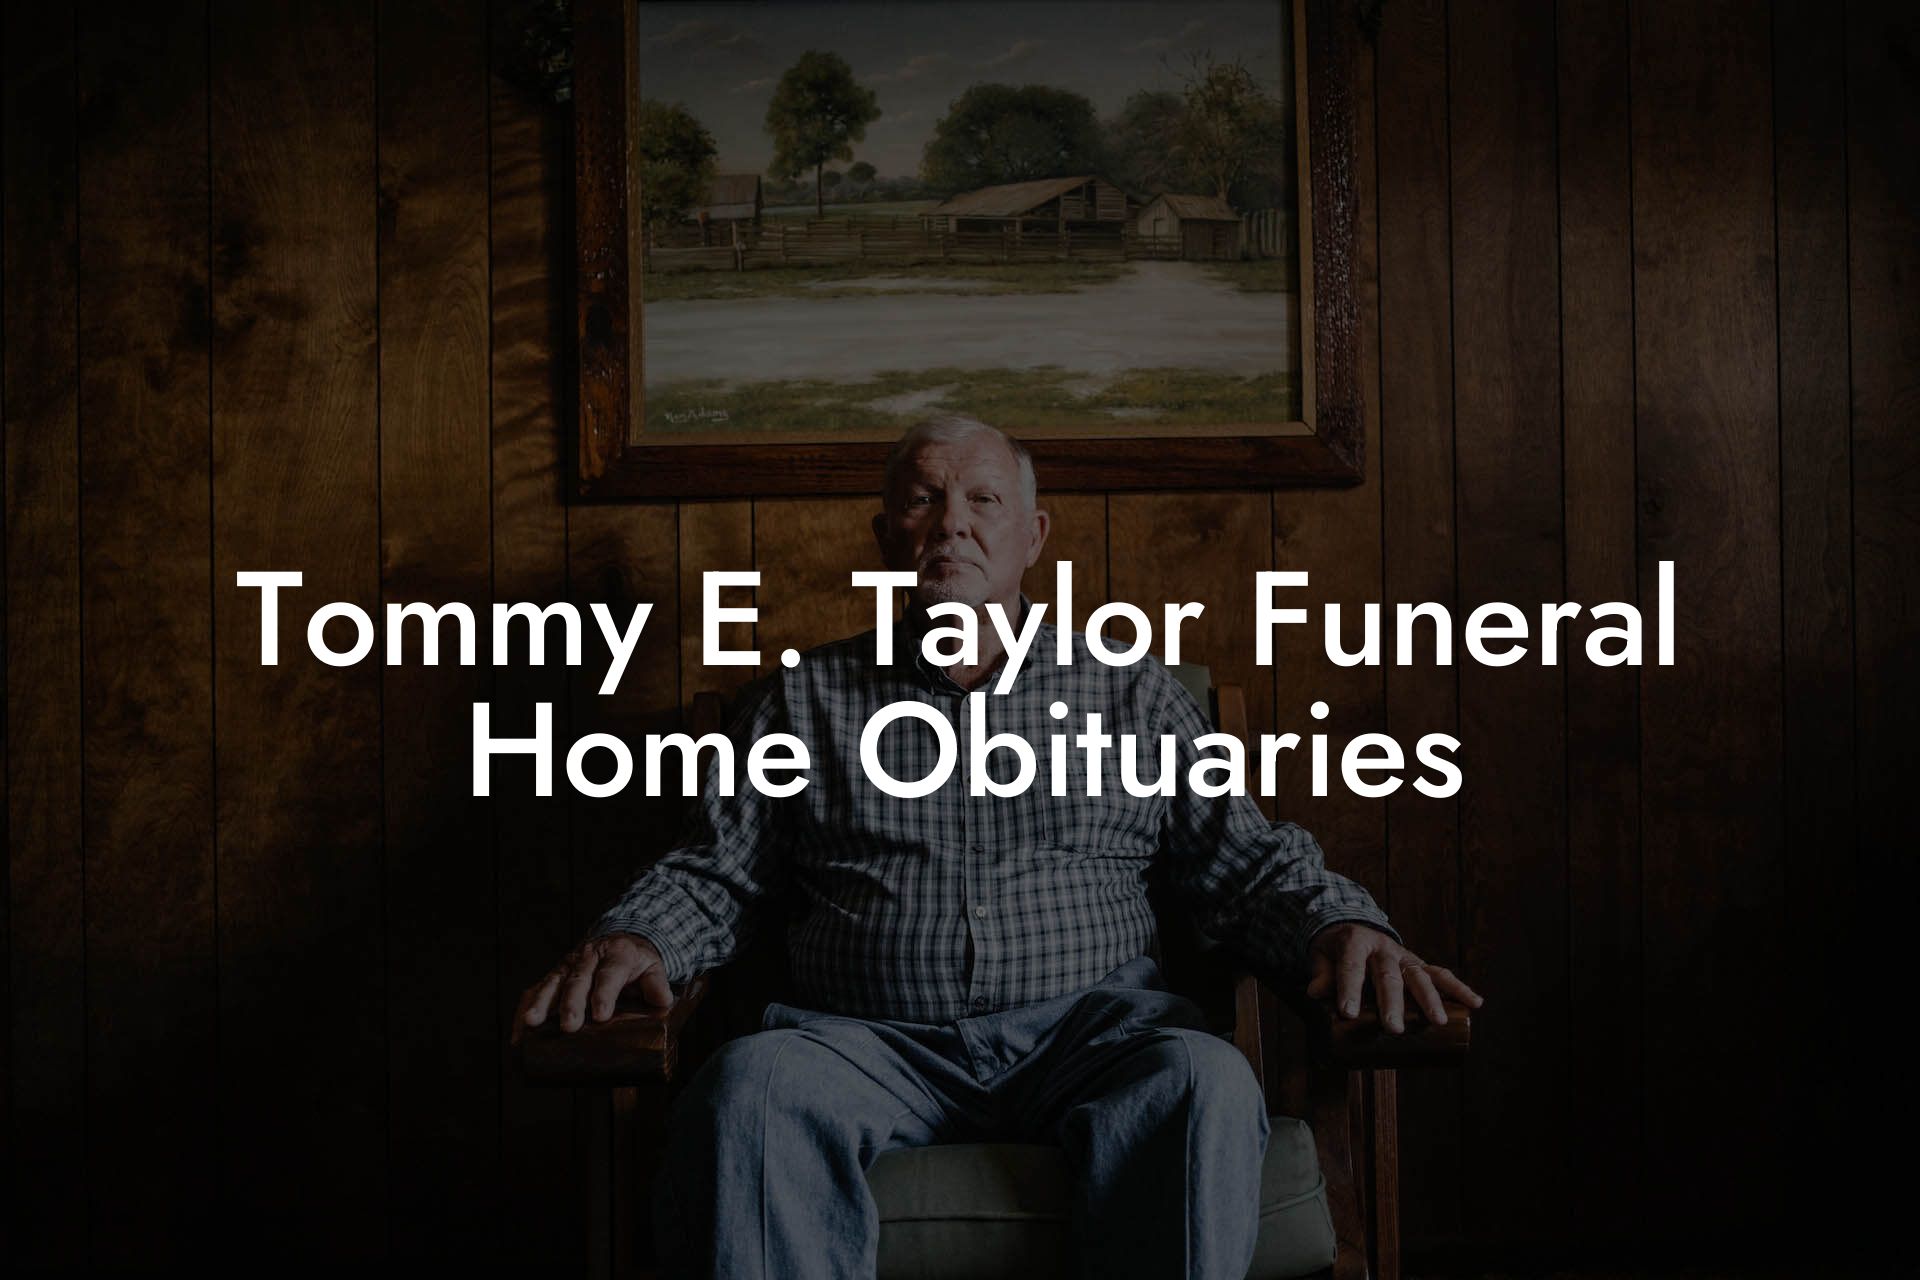 Tommy E. Taylor Funeral Home Obituaries